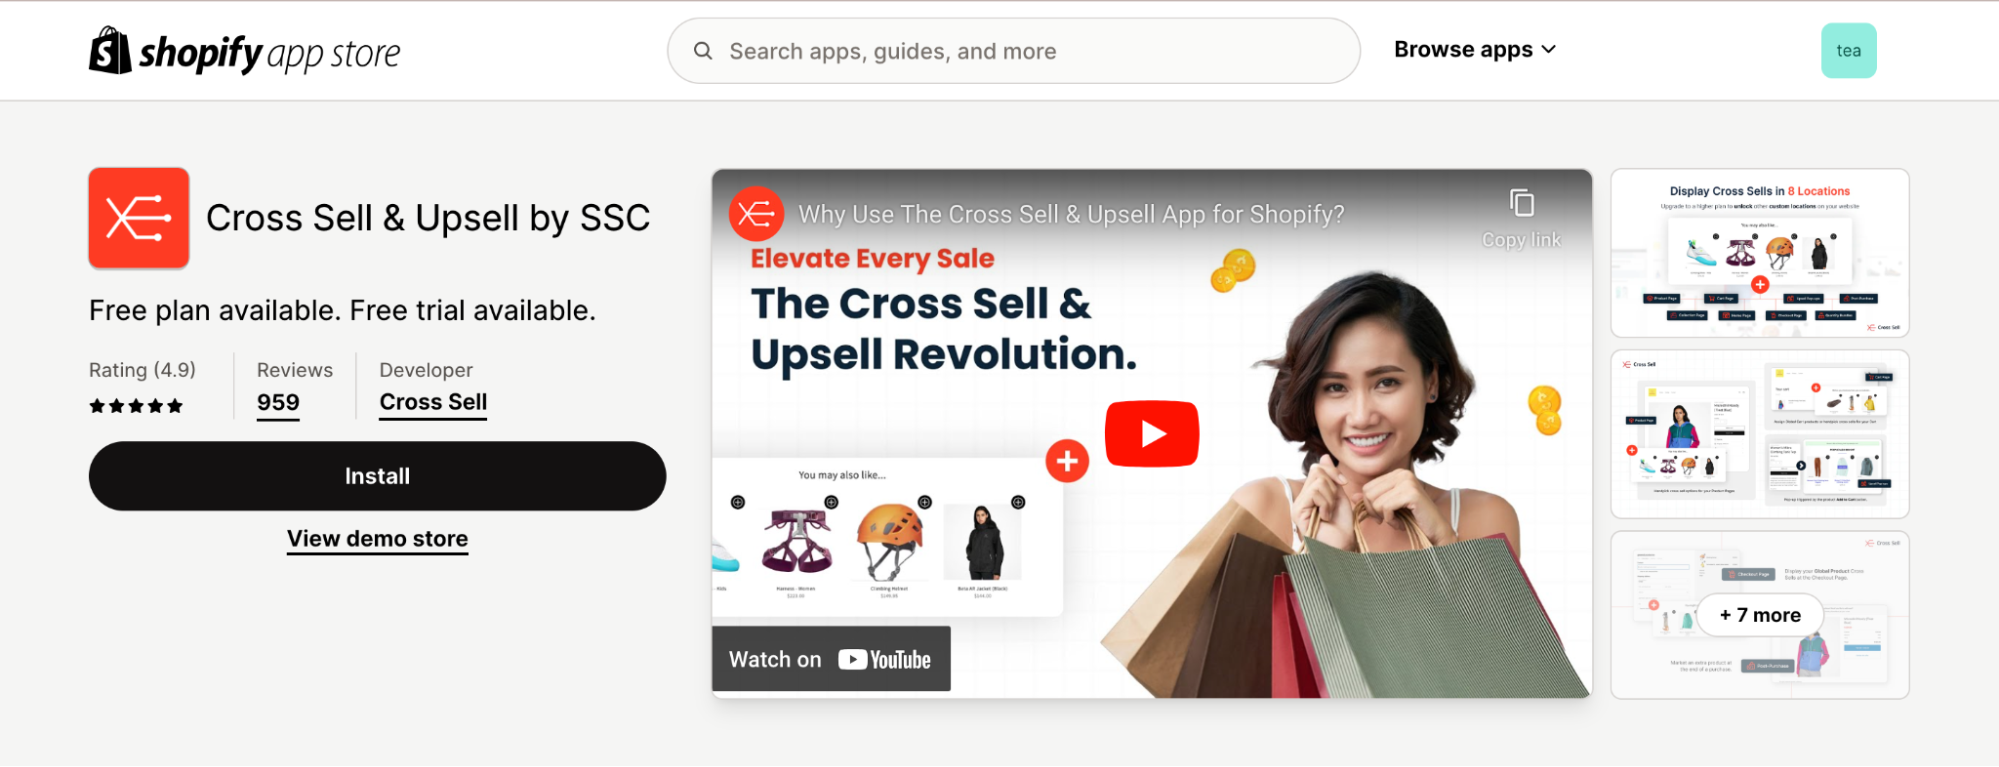 View of Cross Sell & Upsell on the Shopify App Store